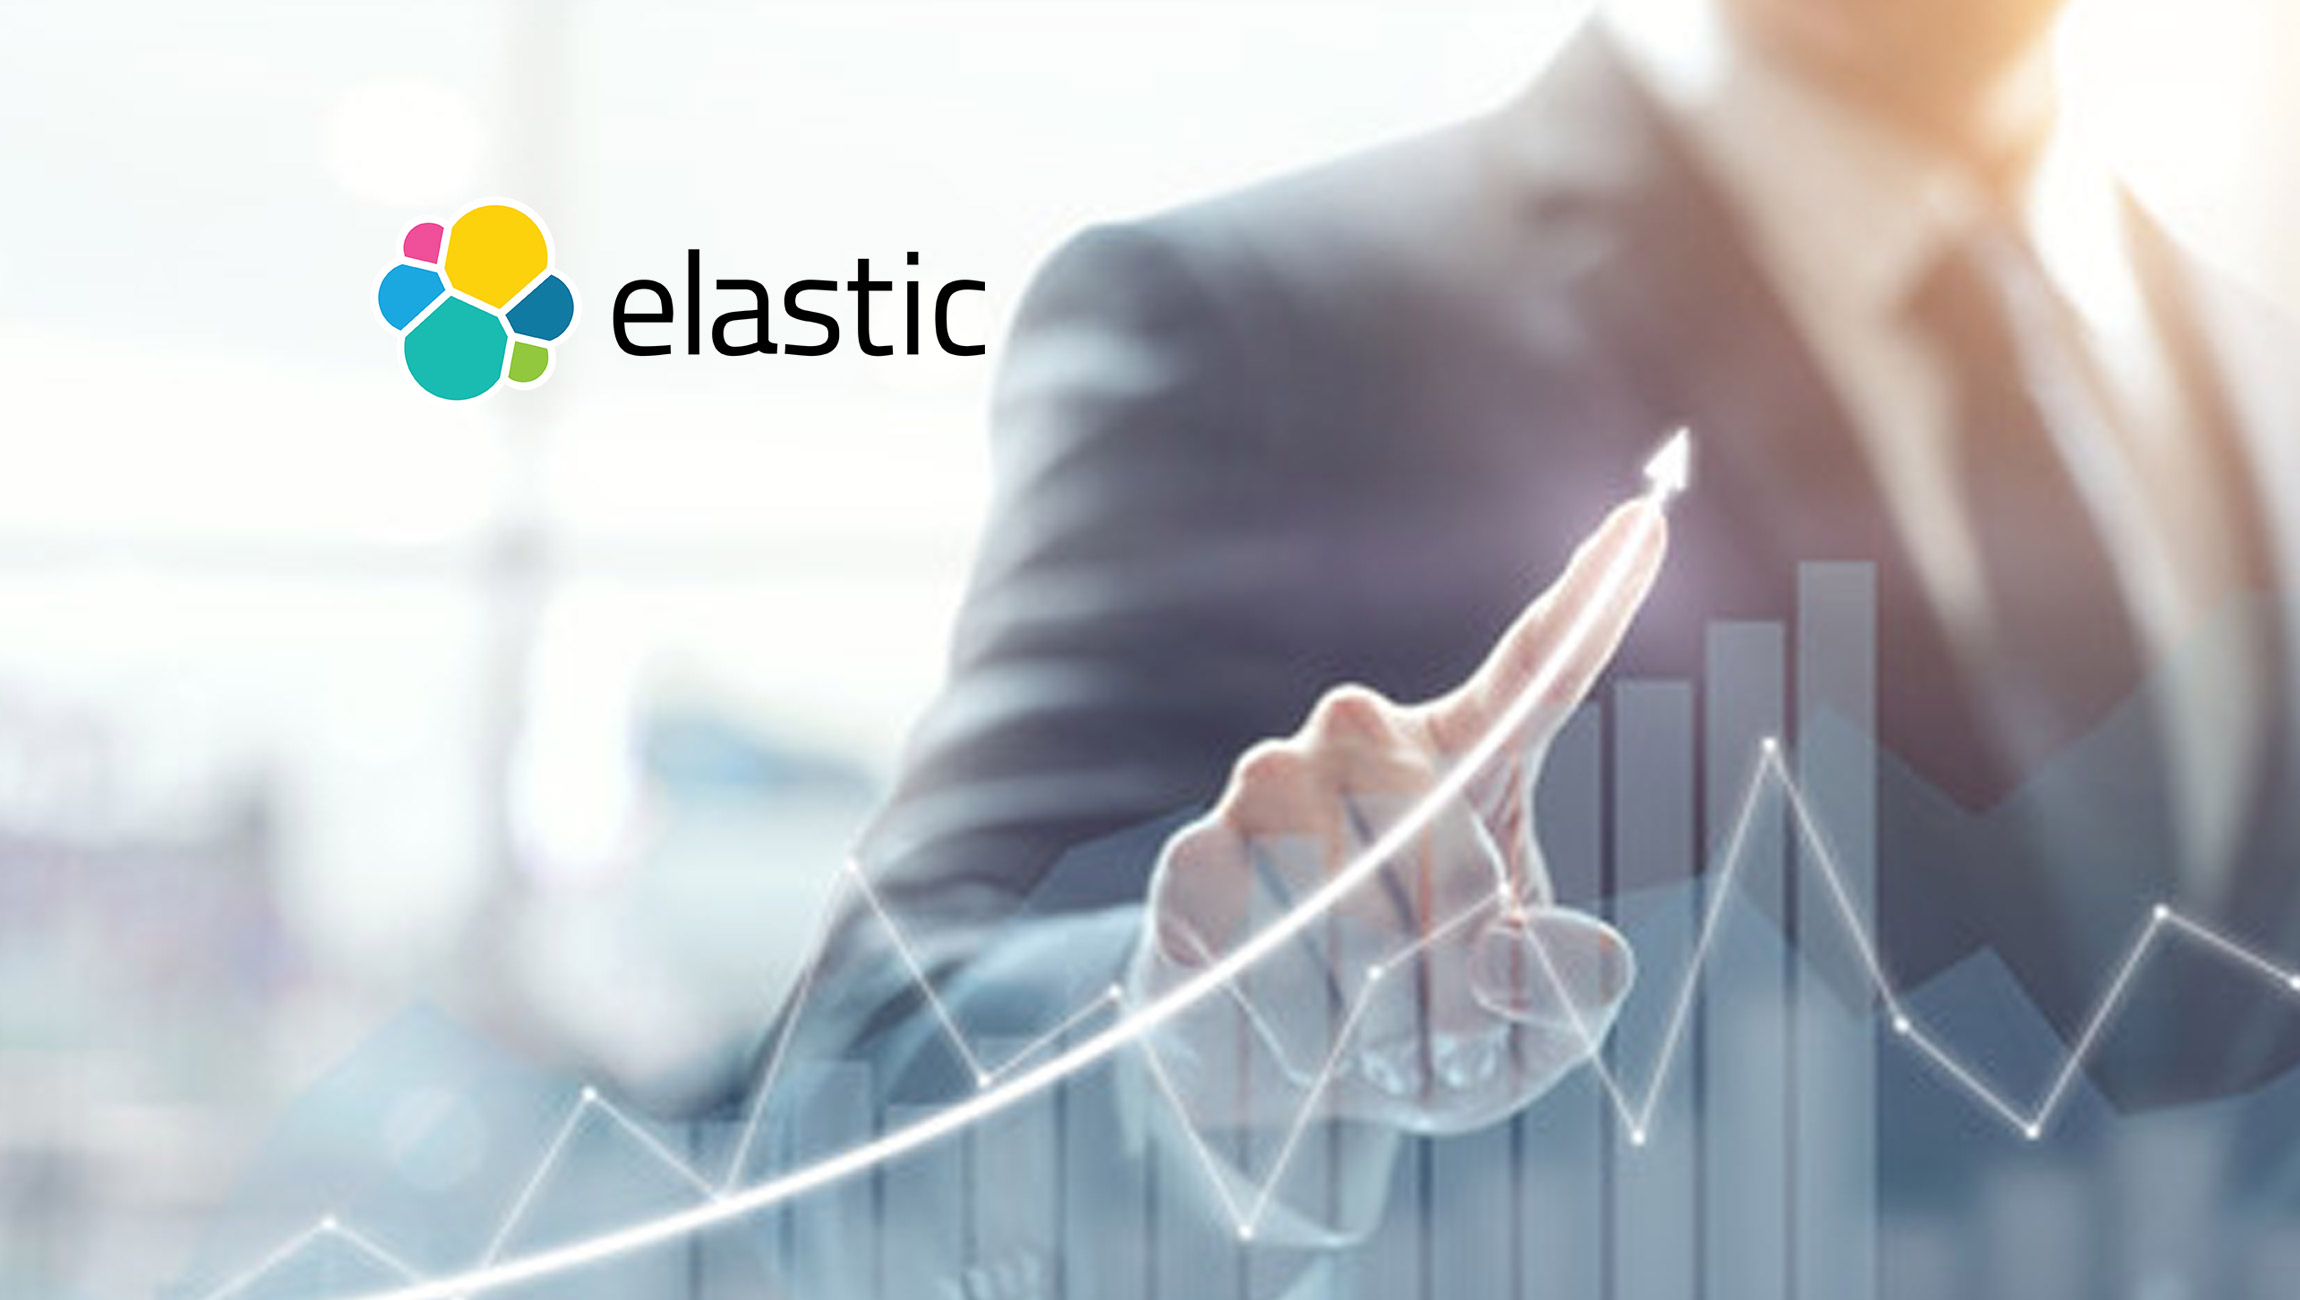 Global Survey of 1,400+ IT Leaders Finds That Elastic Helps Organizations Increase Profitability and Growth